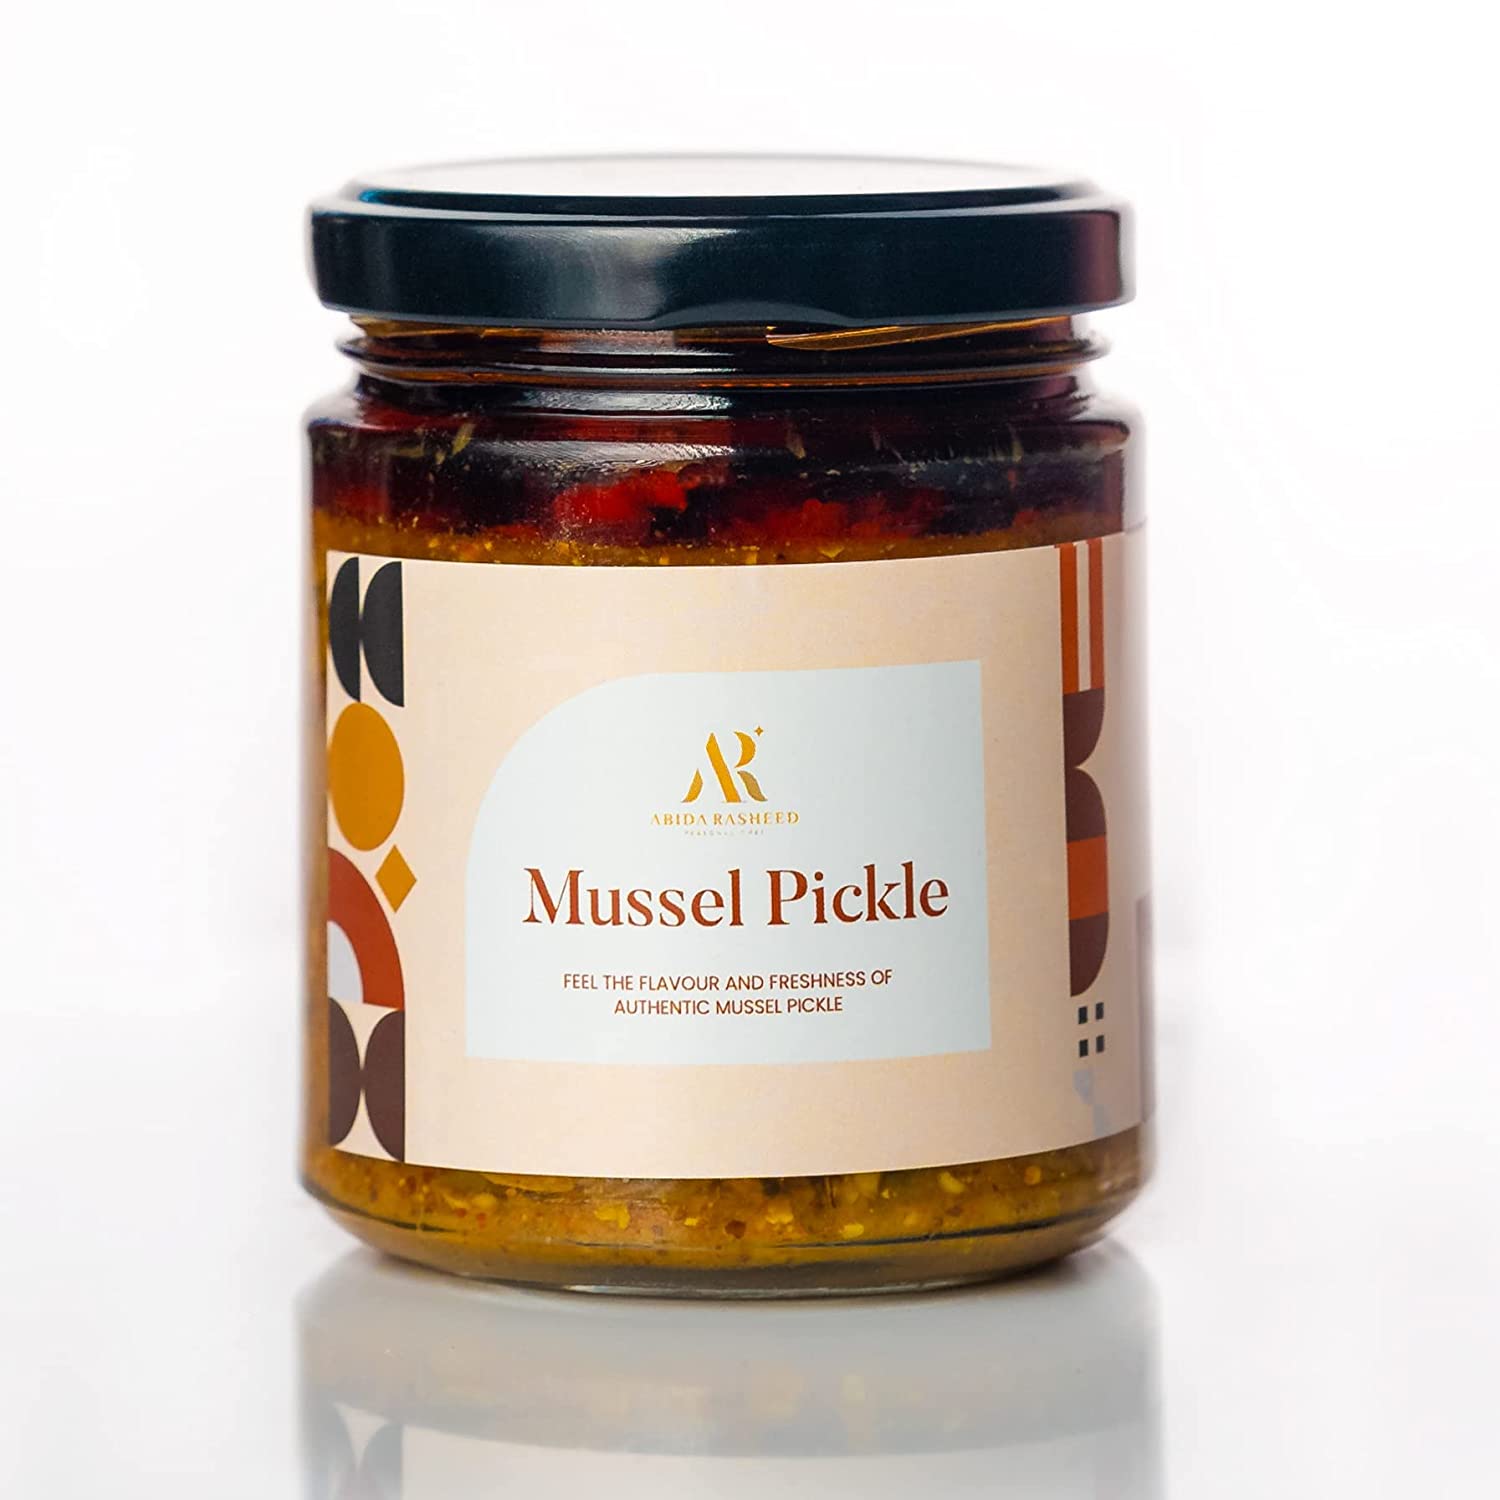 Mussel Pickle